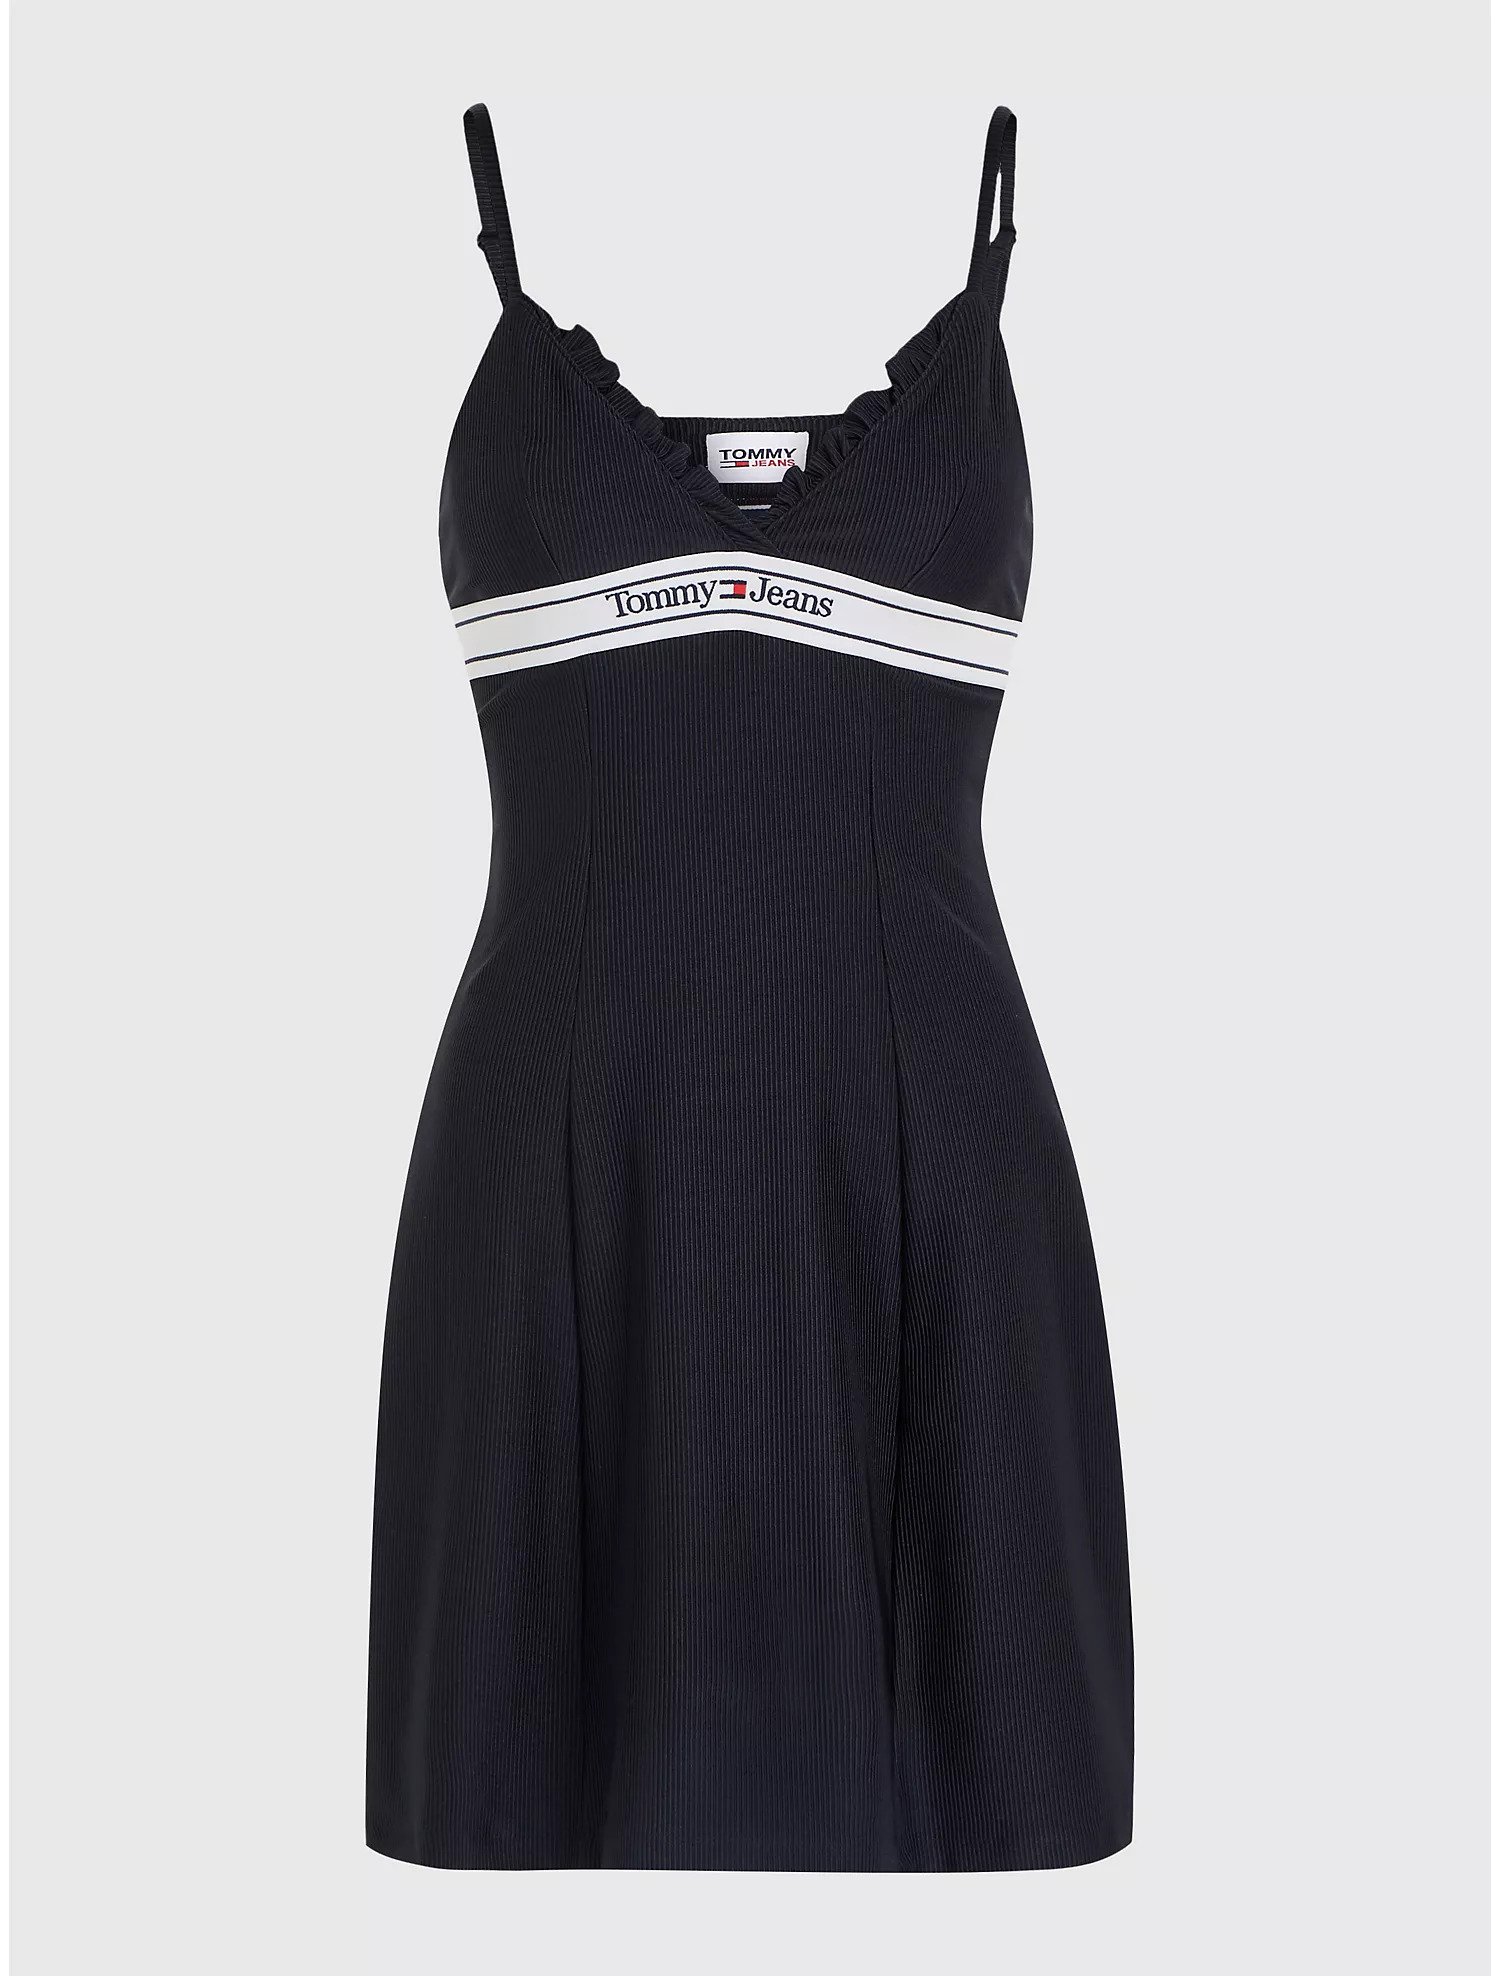 TOMMY JEANS FIT AND FLARE STRAPPY LOGO DRESS